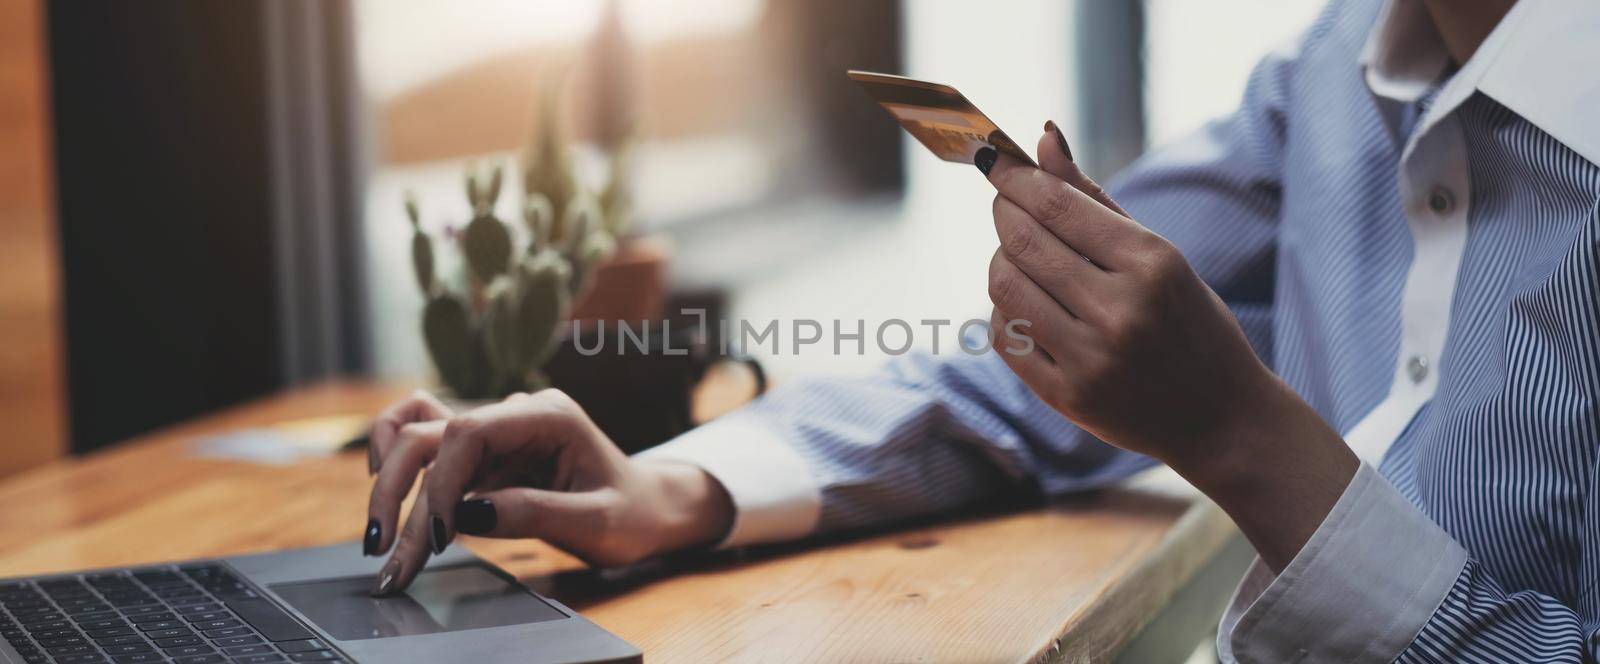 Hands holding credit card, typing on the keyboard of laptop, onine shopping detail close up.